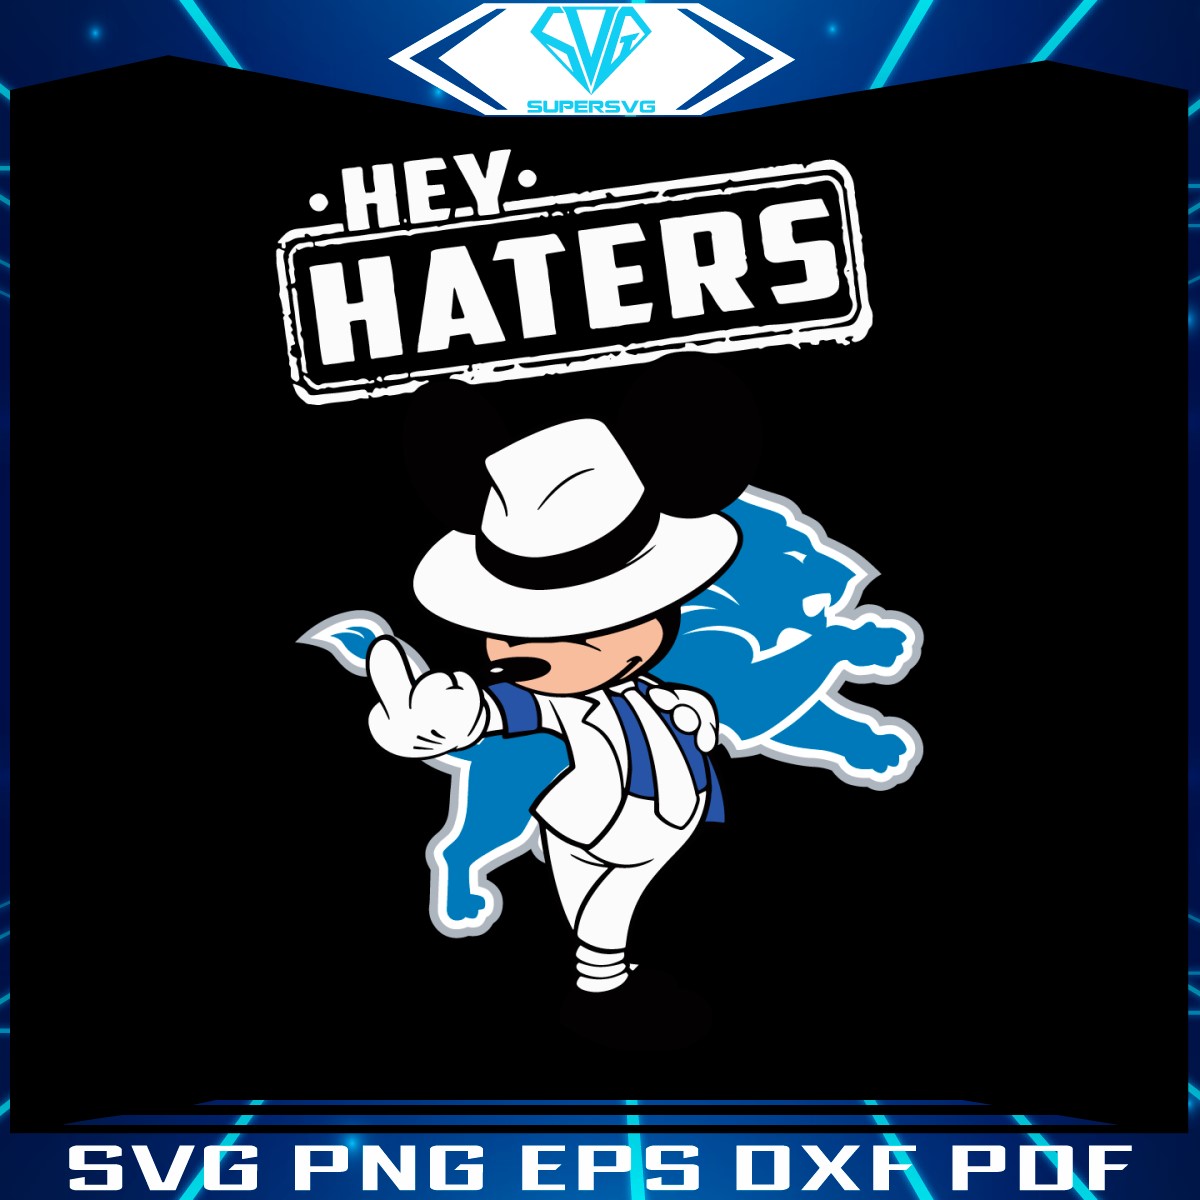 hey-haters-detroit-lions-mickey-svg